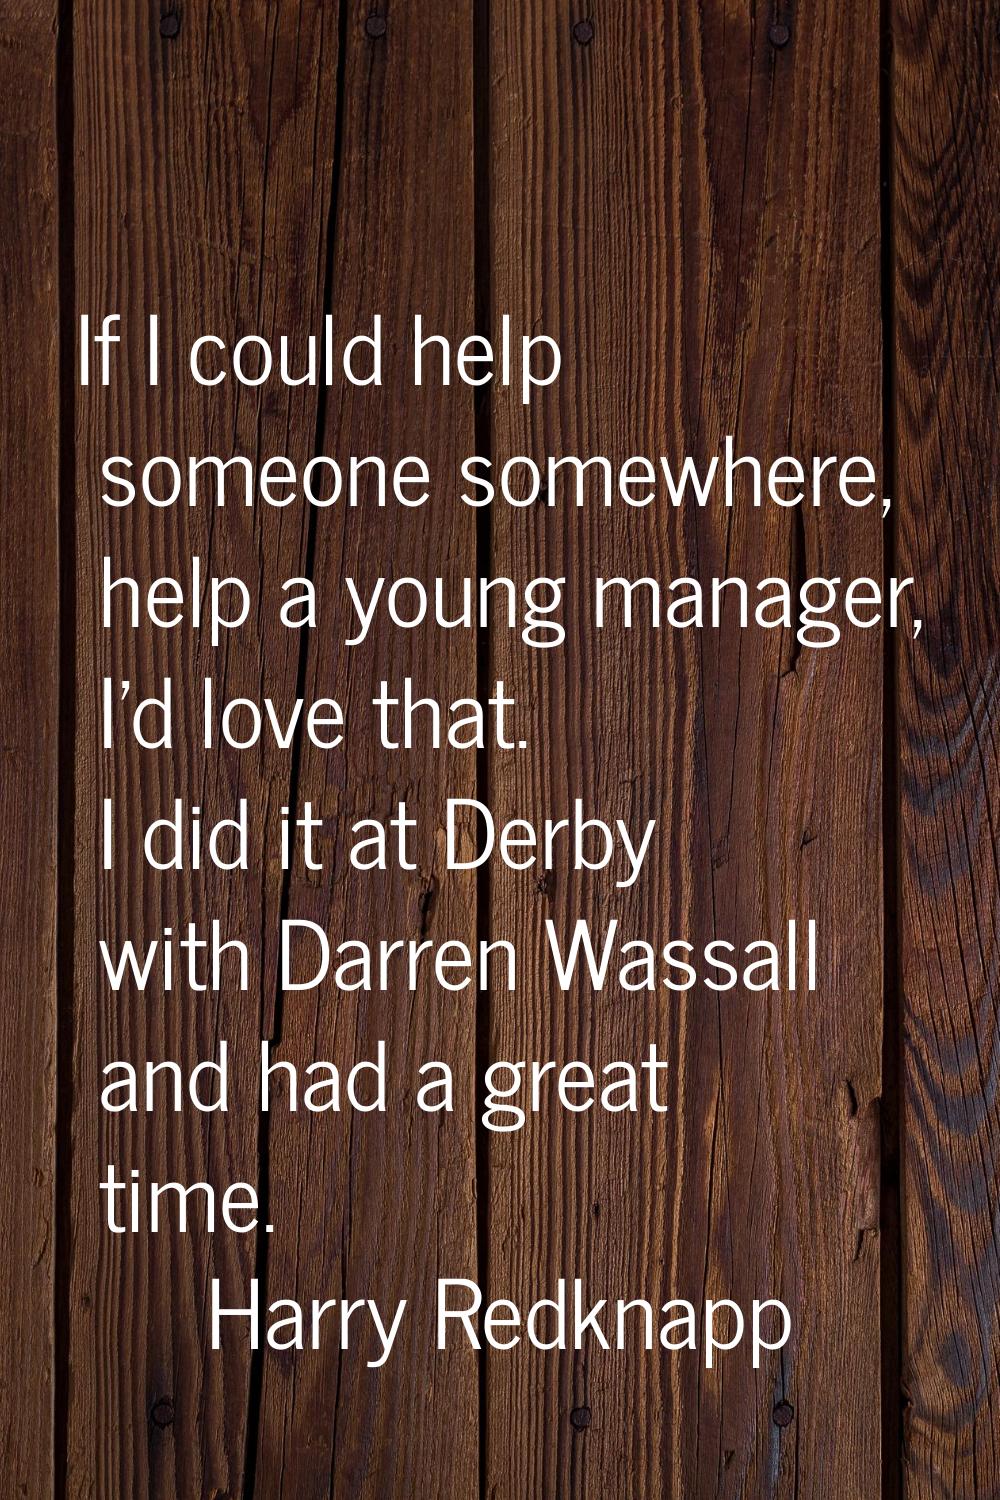 If I could help someone somewhere, help a young manager, I'd love that. I did it at Derby with Darr